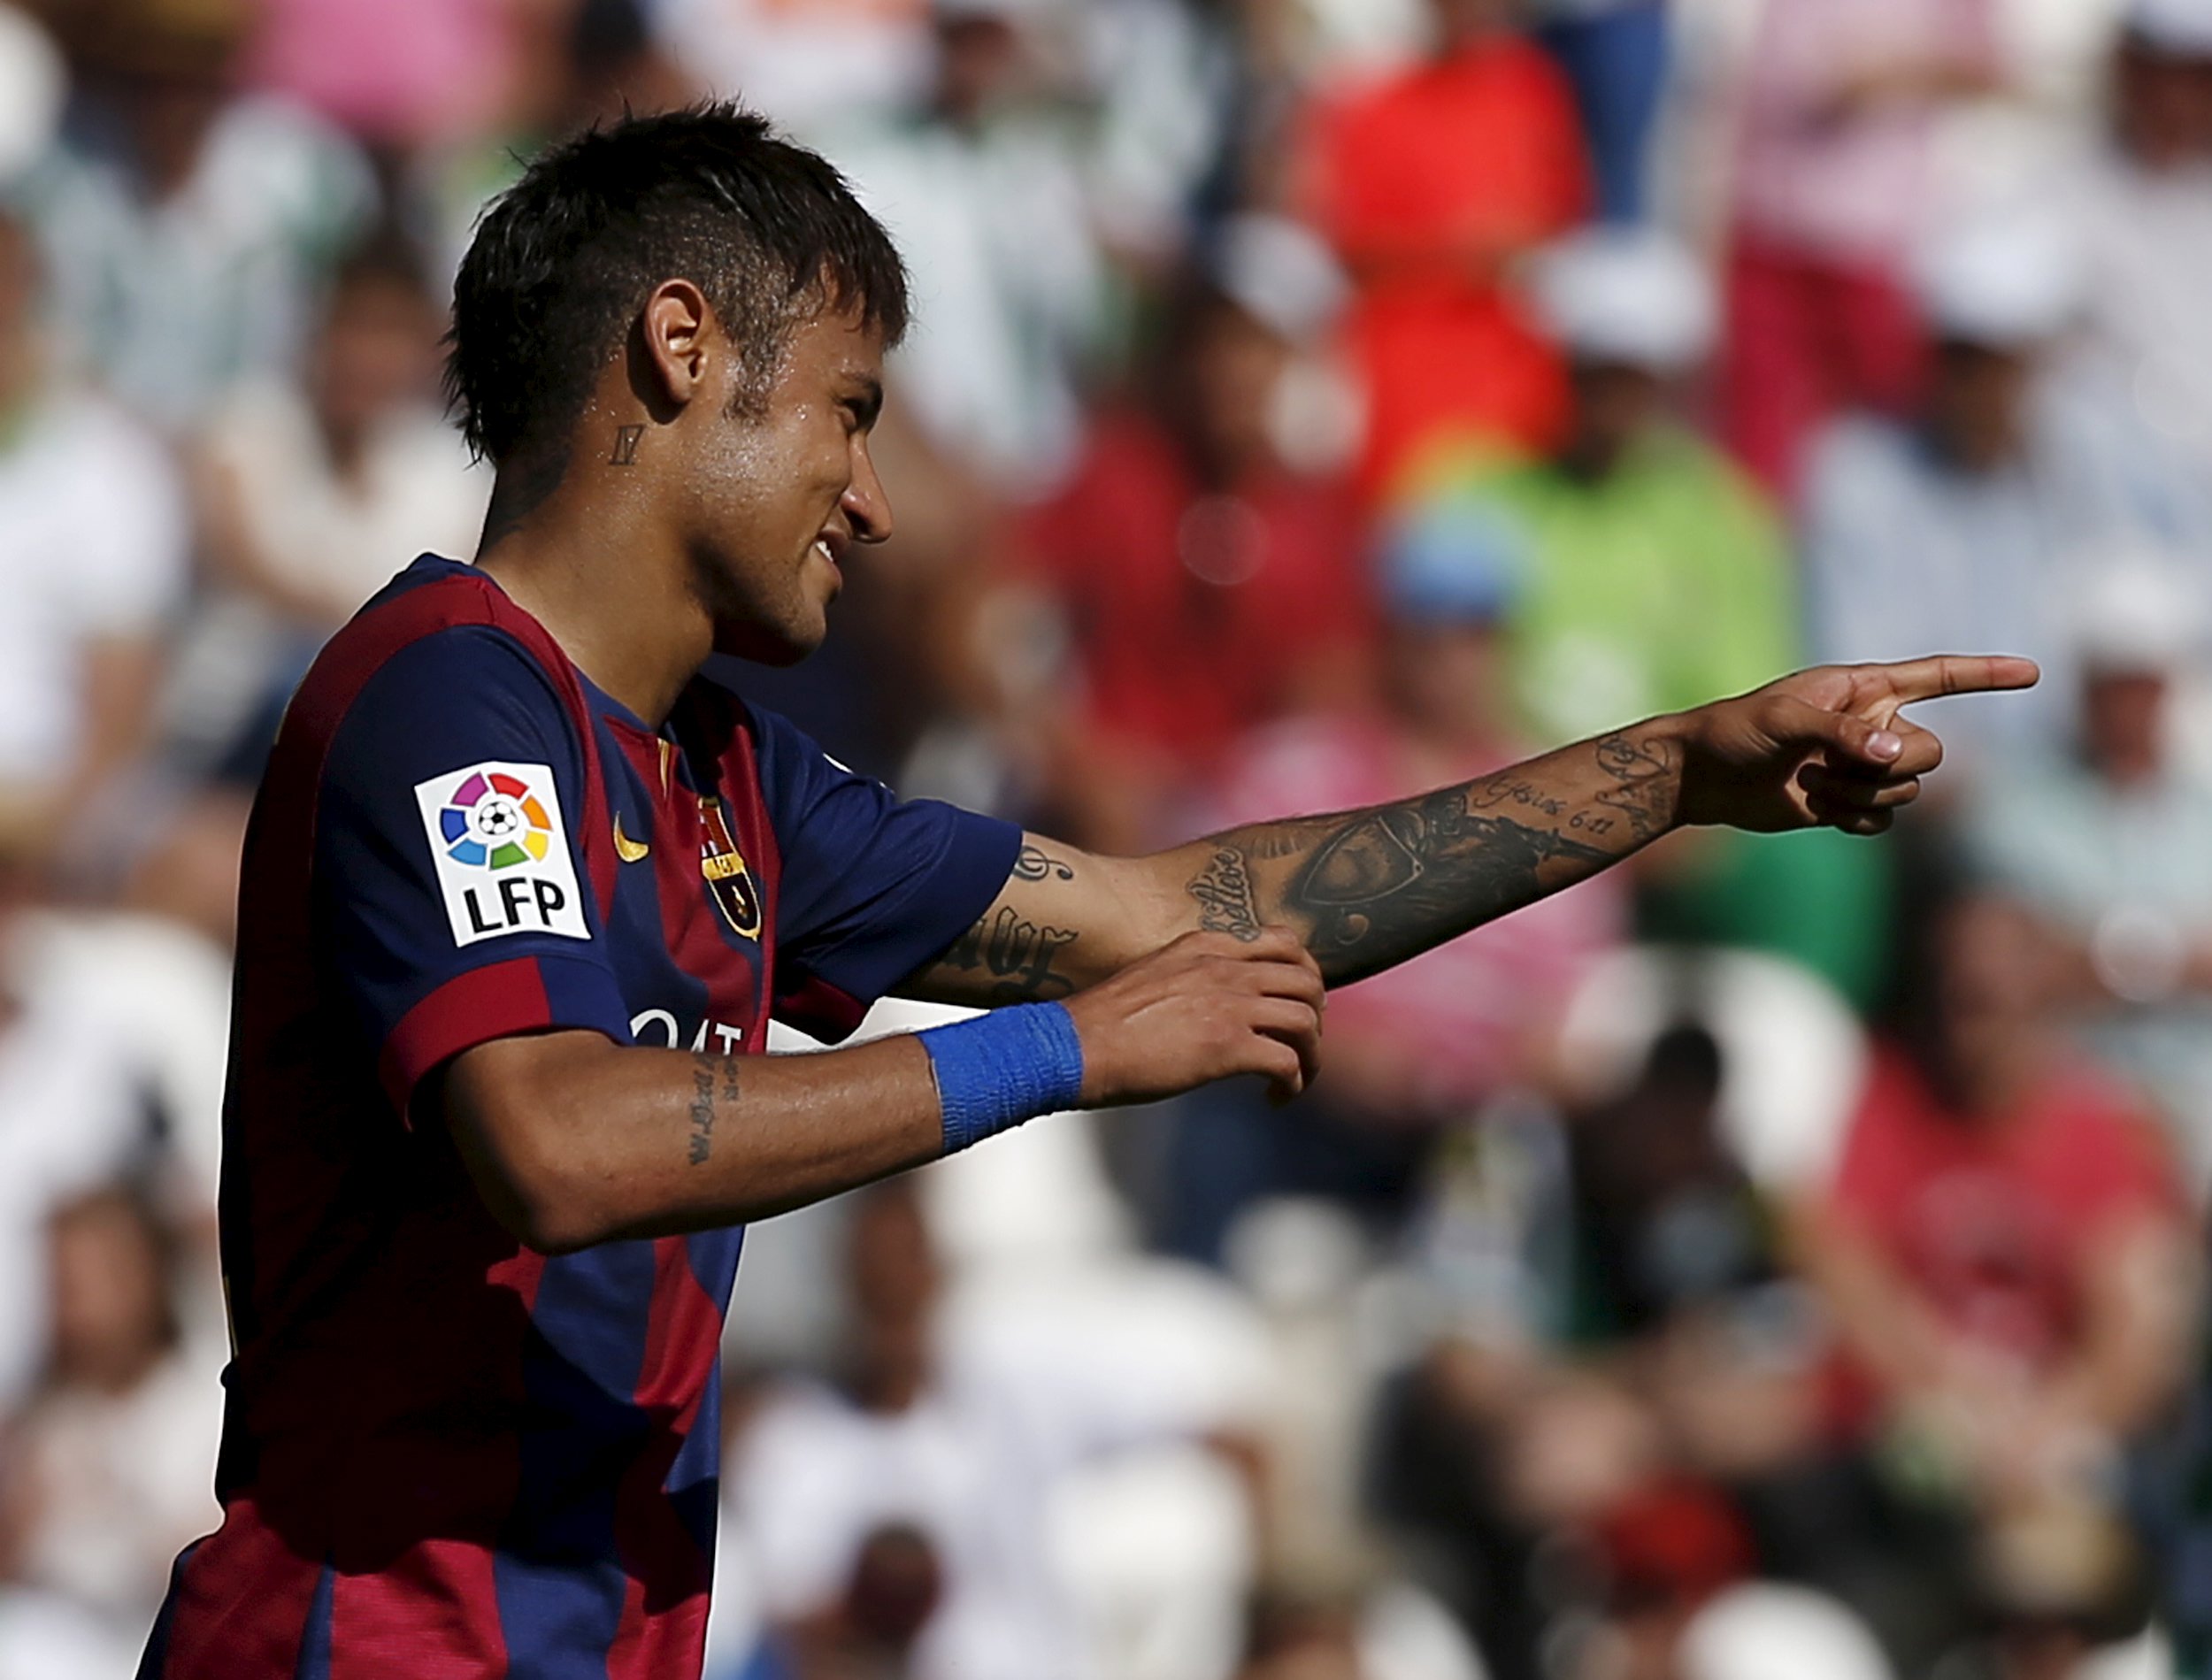 Barcelona's Neymar celebrates after scoring a goal against Cordoba during their Spanish first division soccer match at El Arcangel stadium in Cordoba, Spain, May 2, 2015. REUTERS/Javier Barbancho